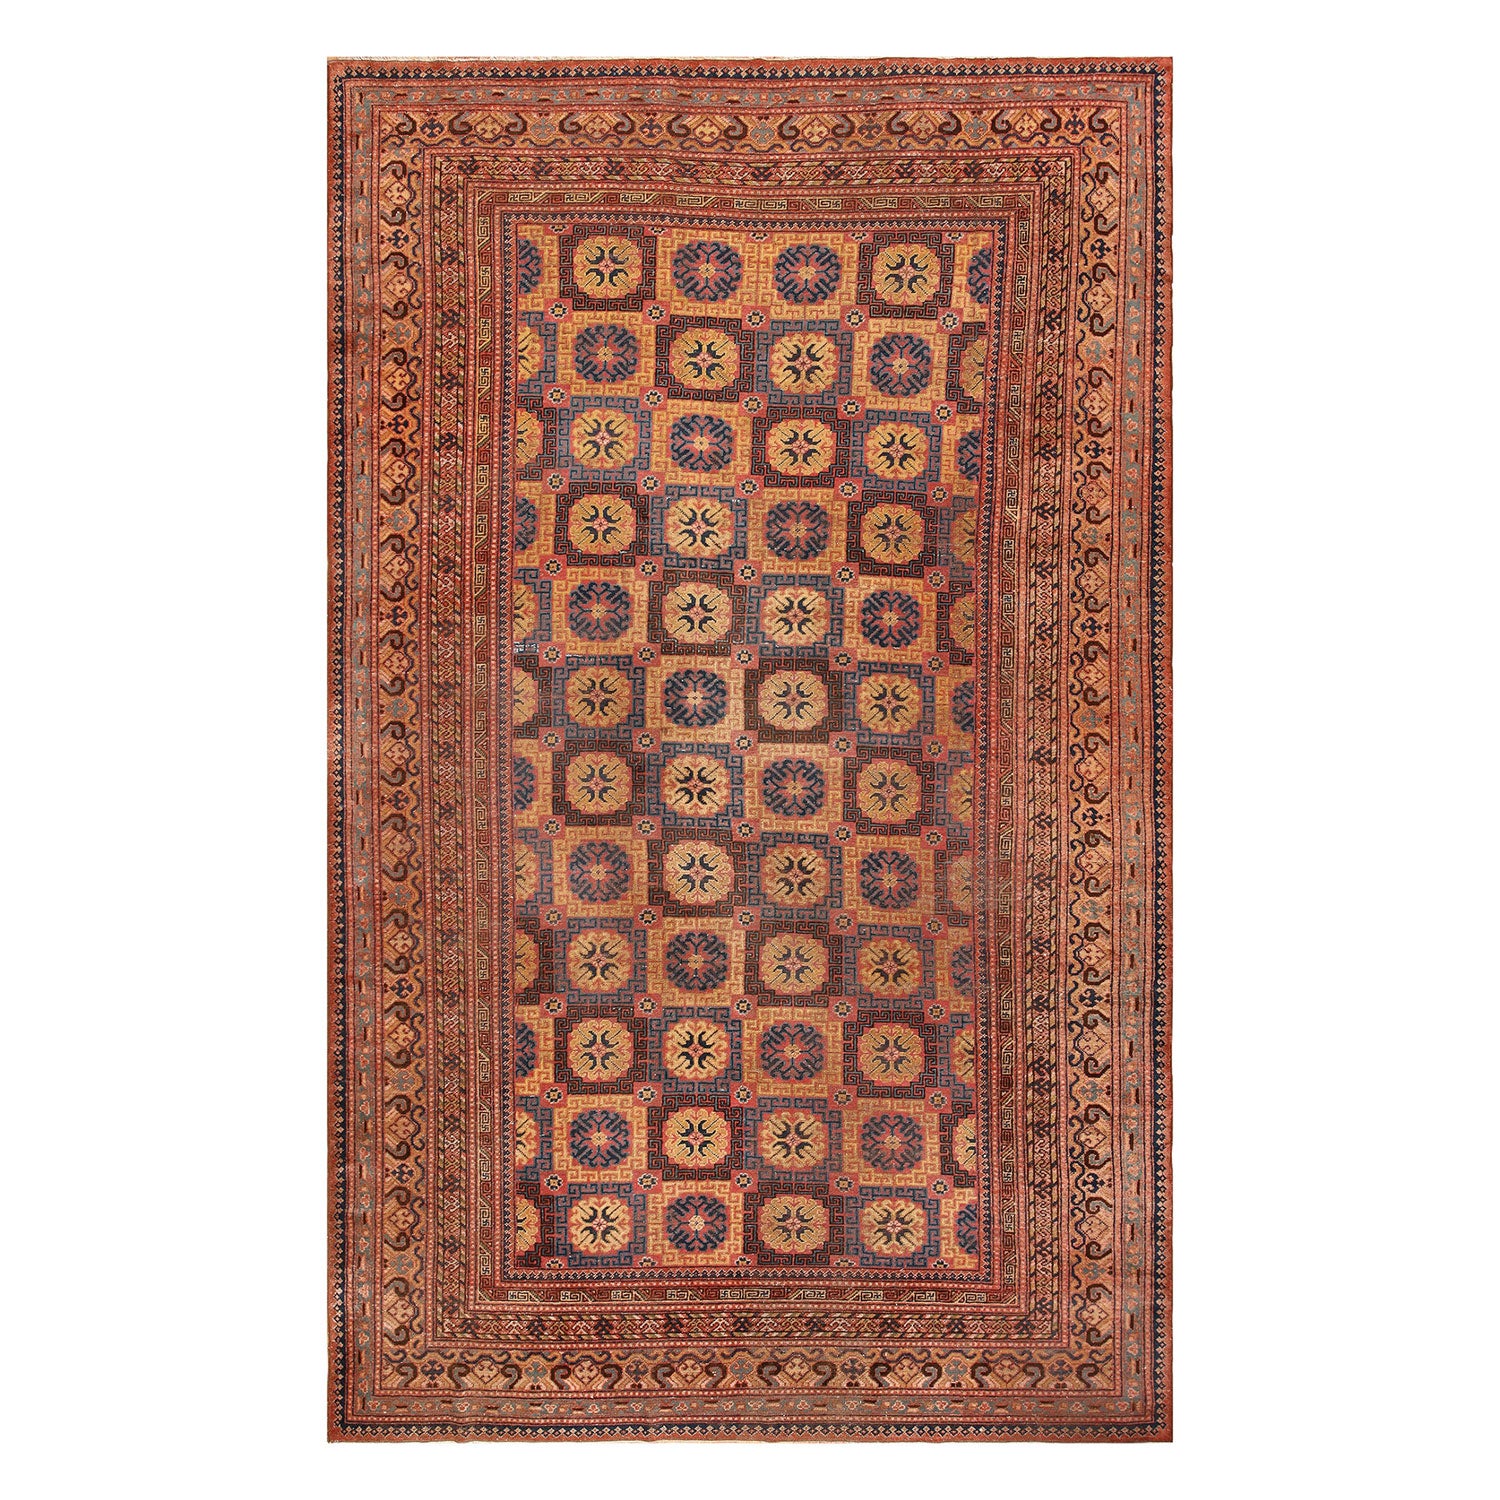 Exquisite hand-woven rug with intricate patterns and rich earthy colors.